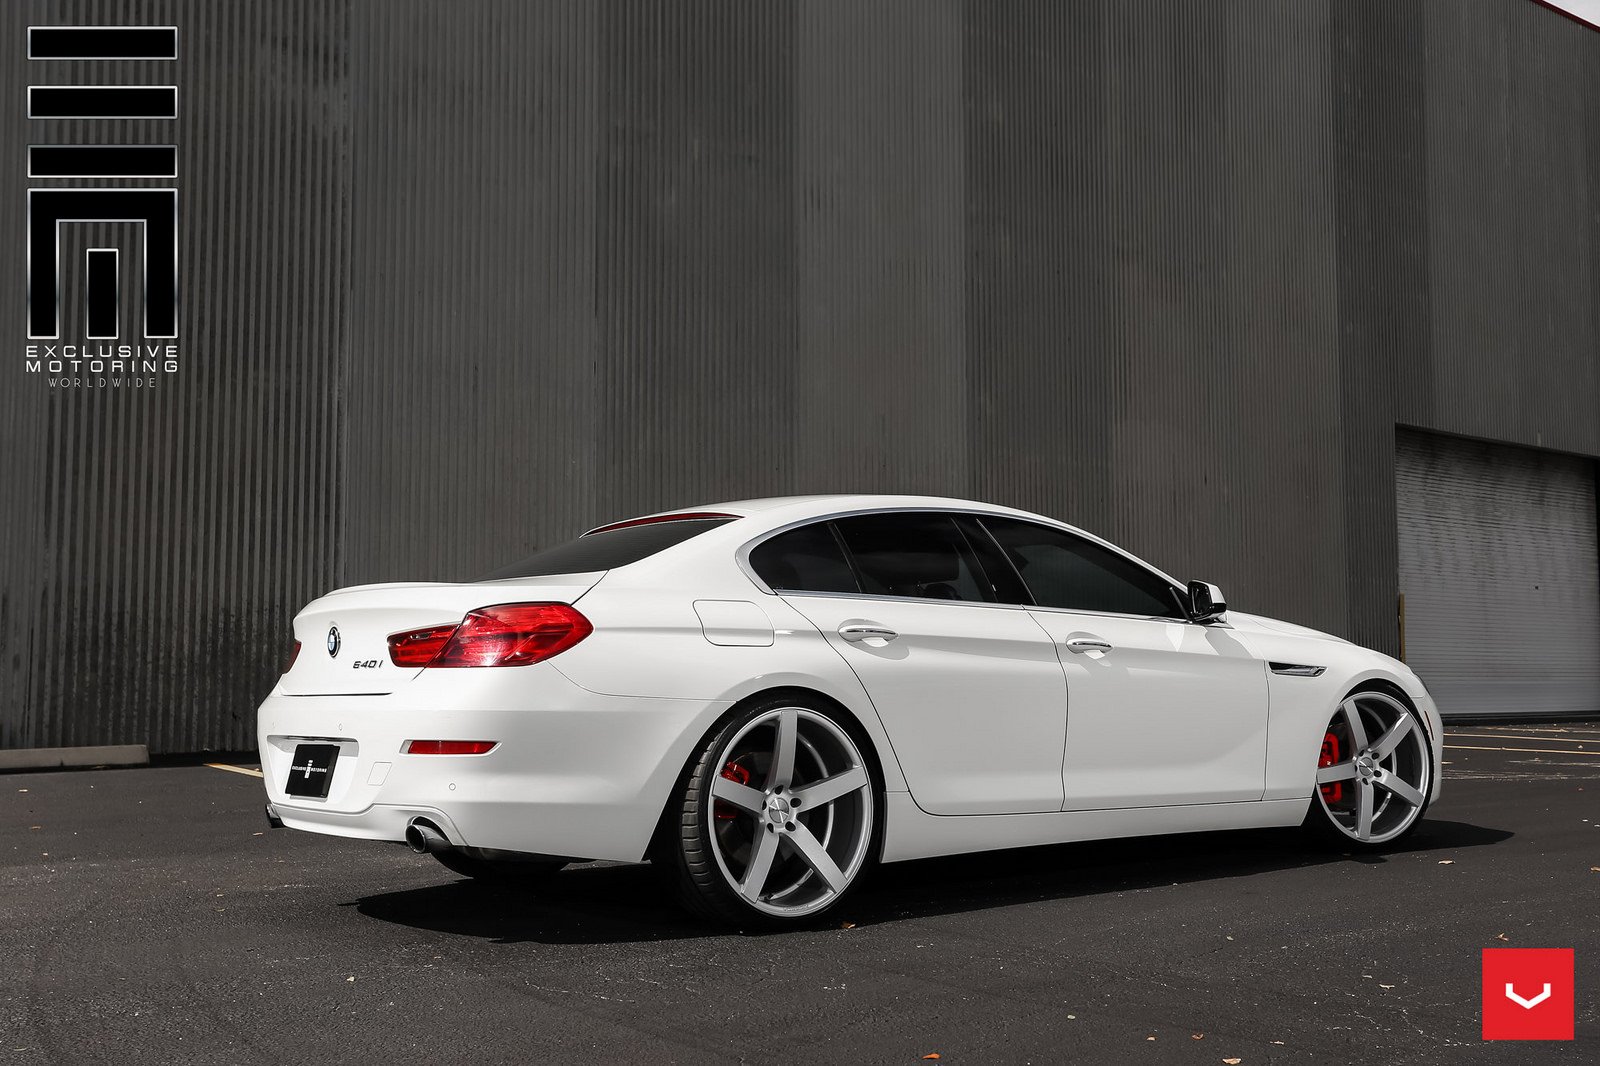 bmw, 6 series, Coupe, Cars, Vossen, Wheels, Cars Wallpaper